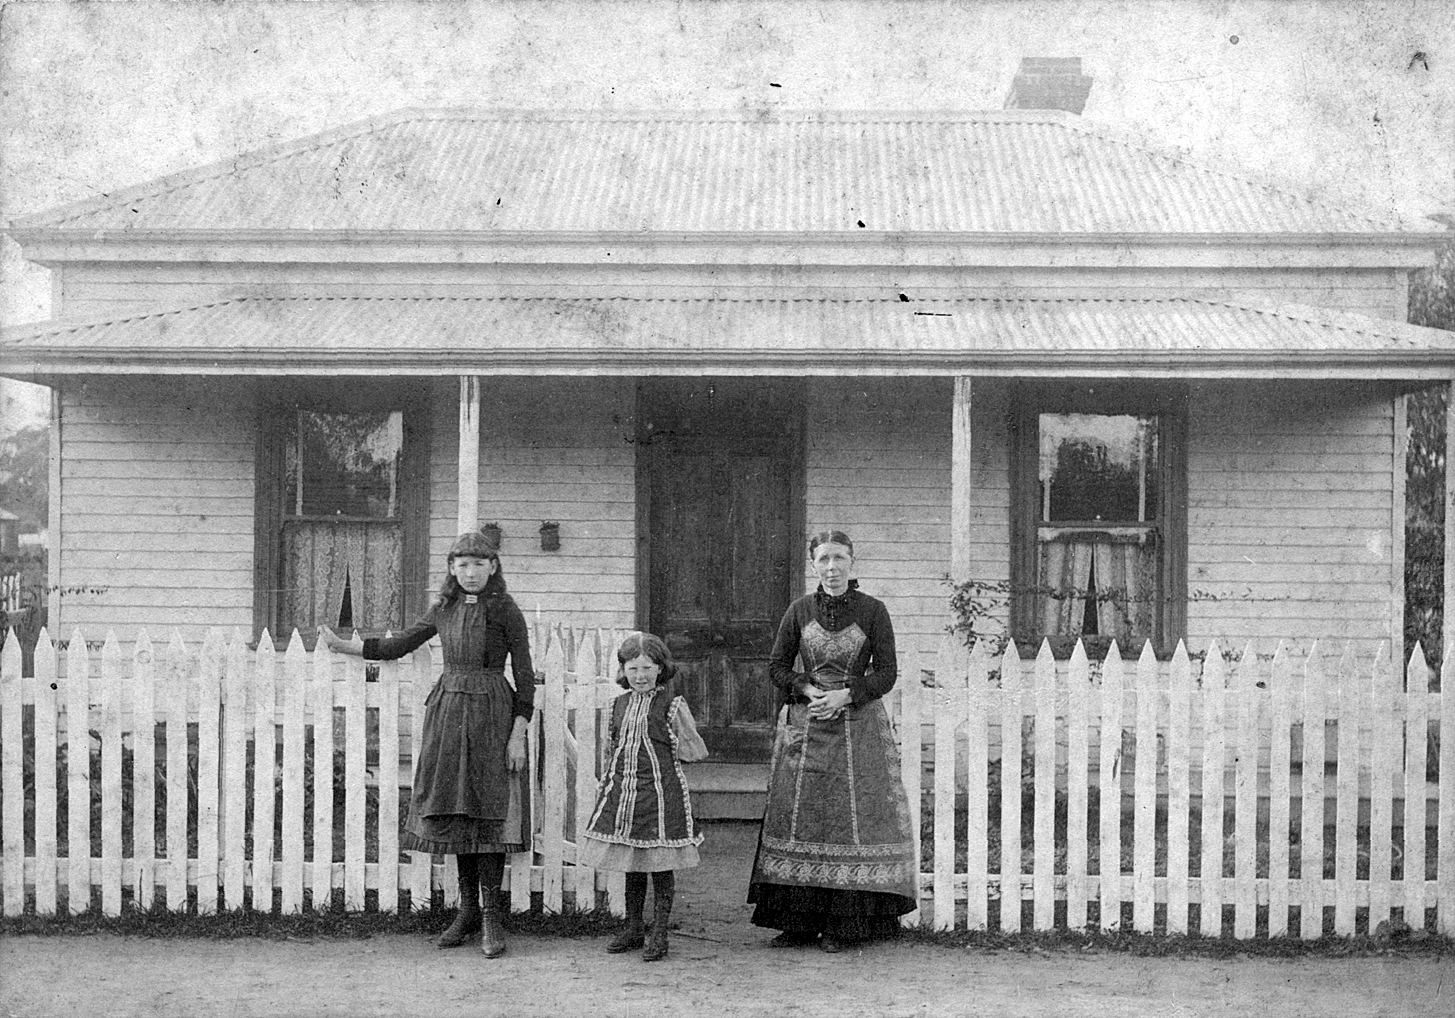 “Mother, Dolly and Louise at home, Euroa,